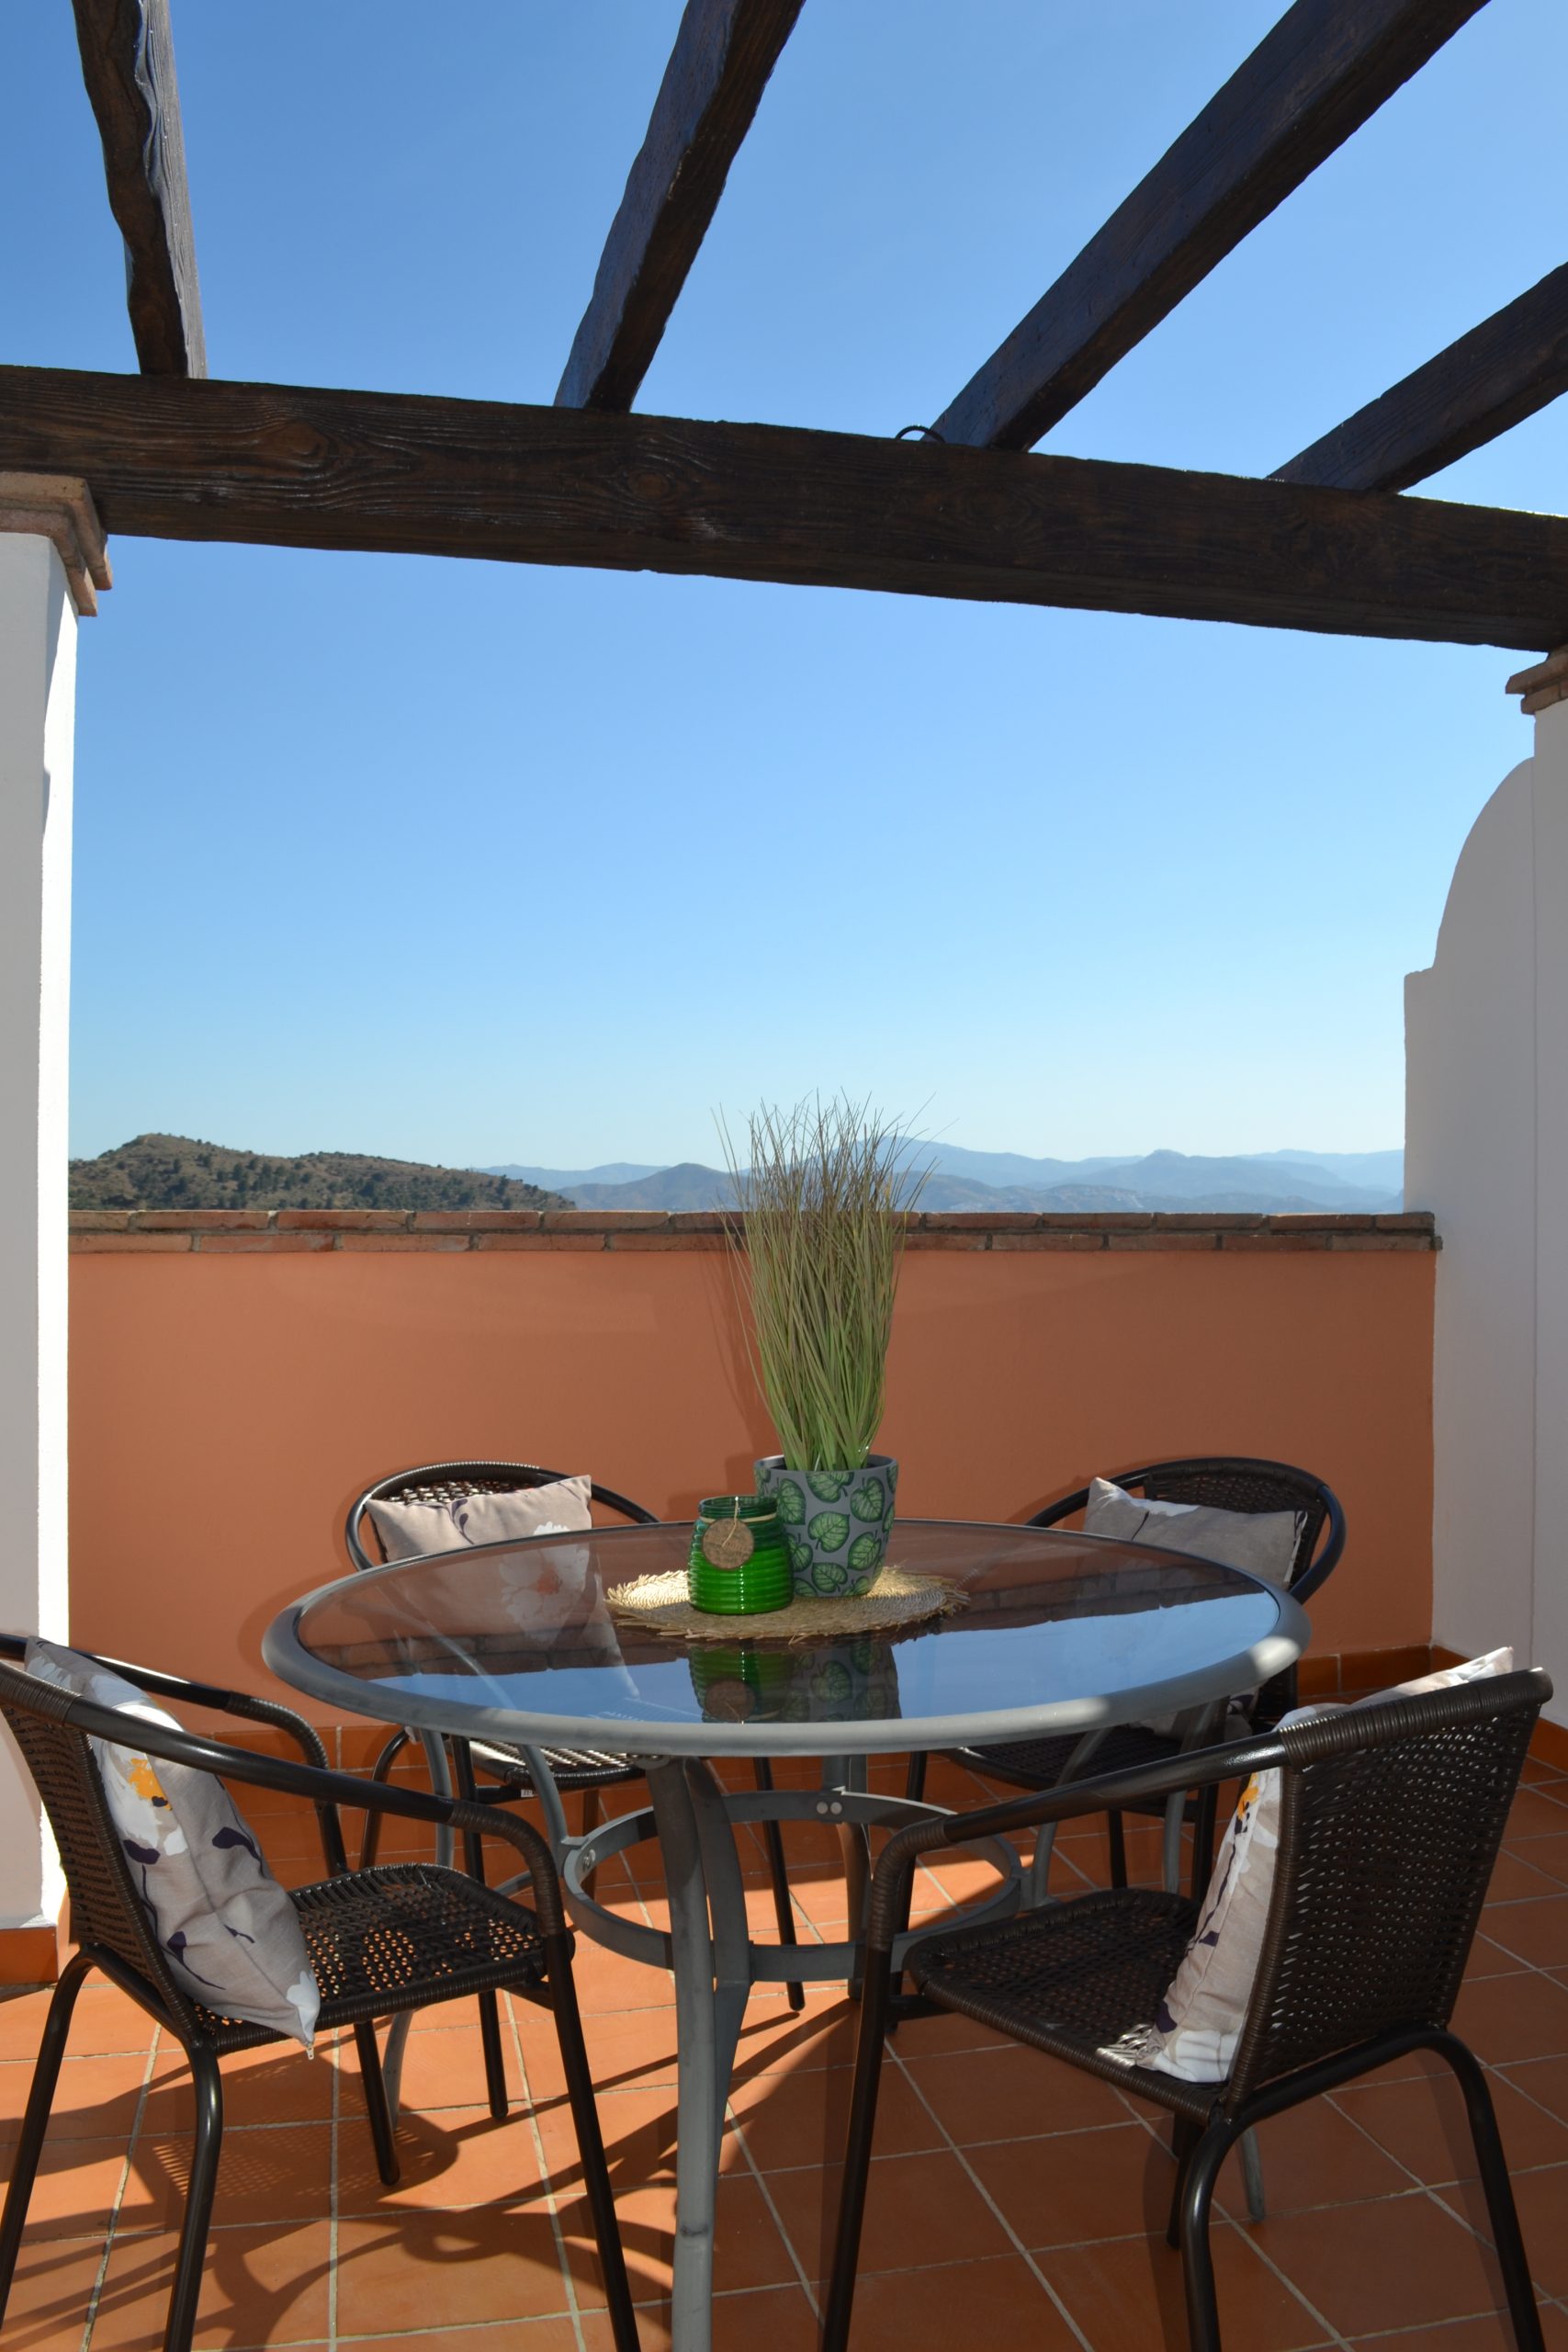 New and Modern Penthouse For Sale in Alcaucin (Malaga).